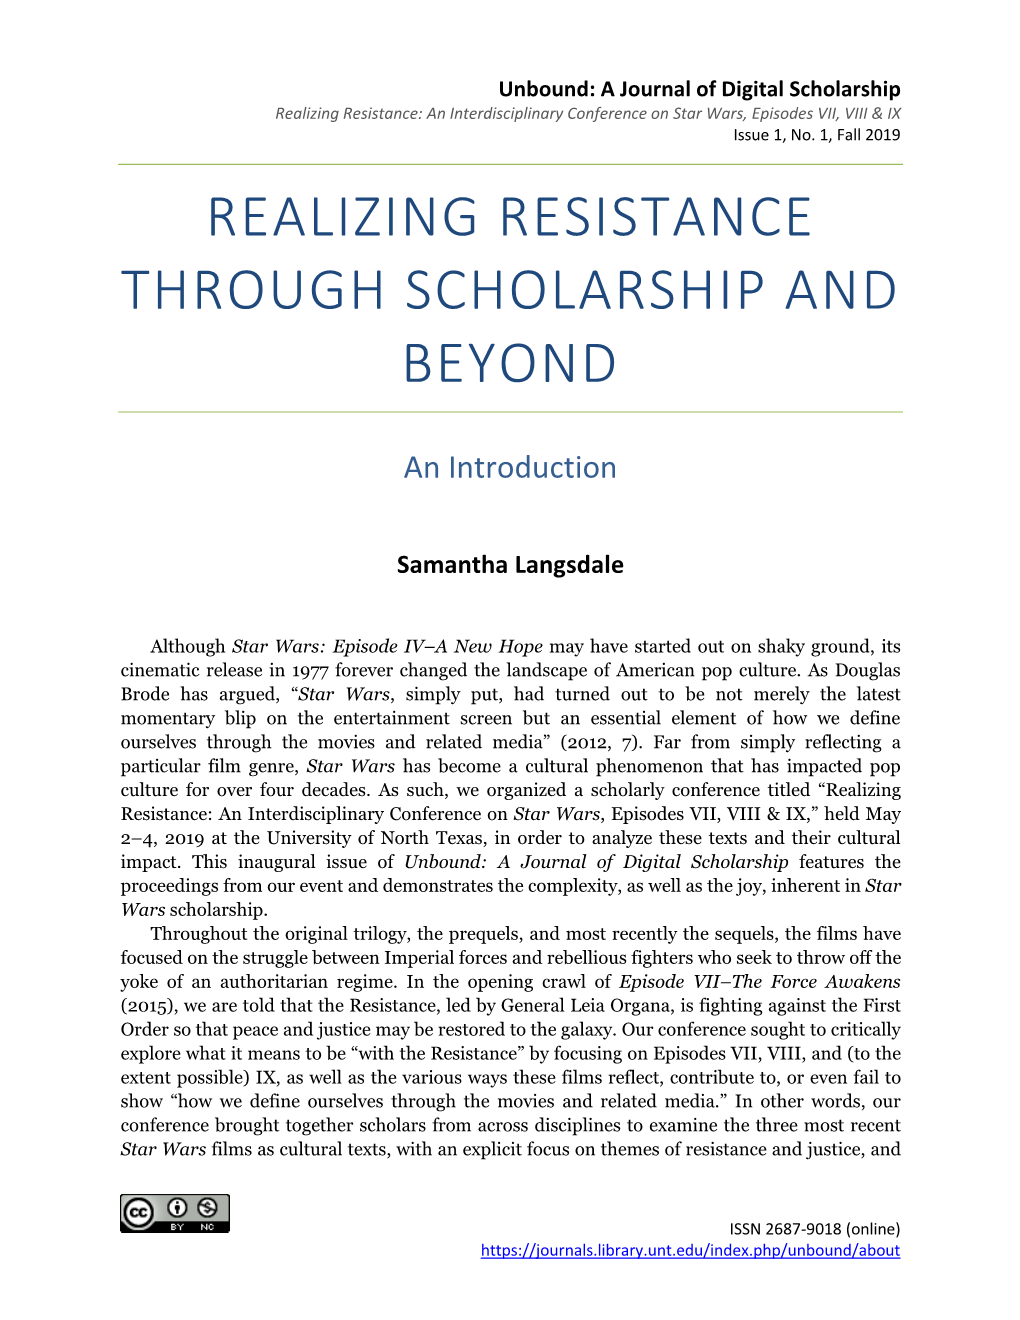 Realizing Resistance Through Scholarship and Beyond